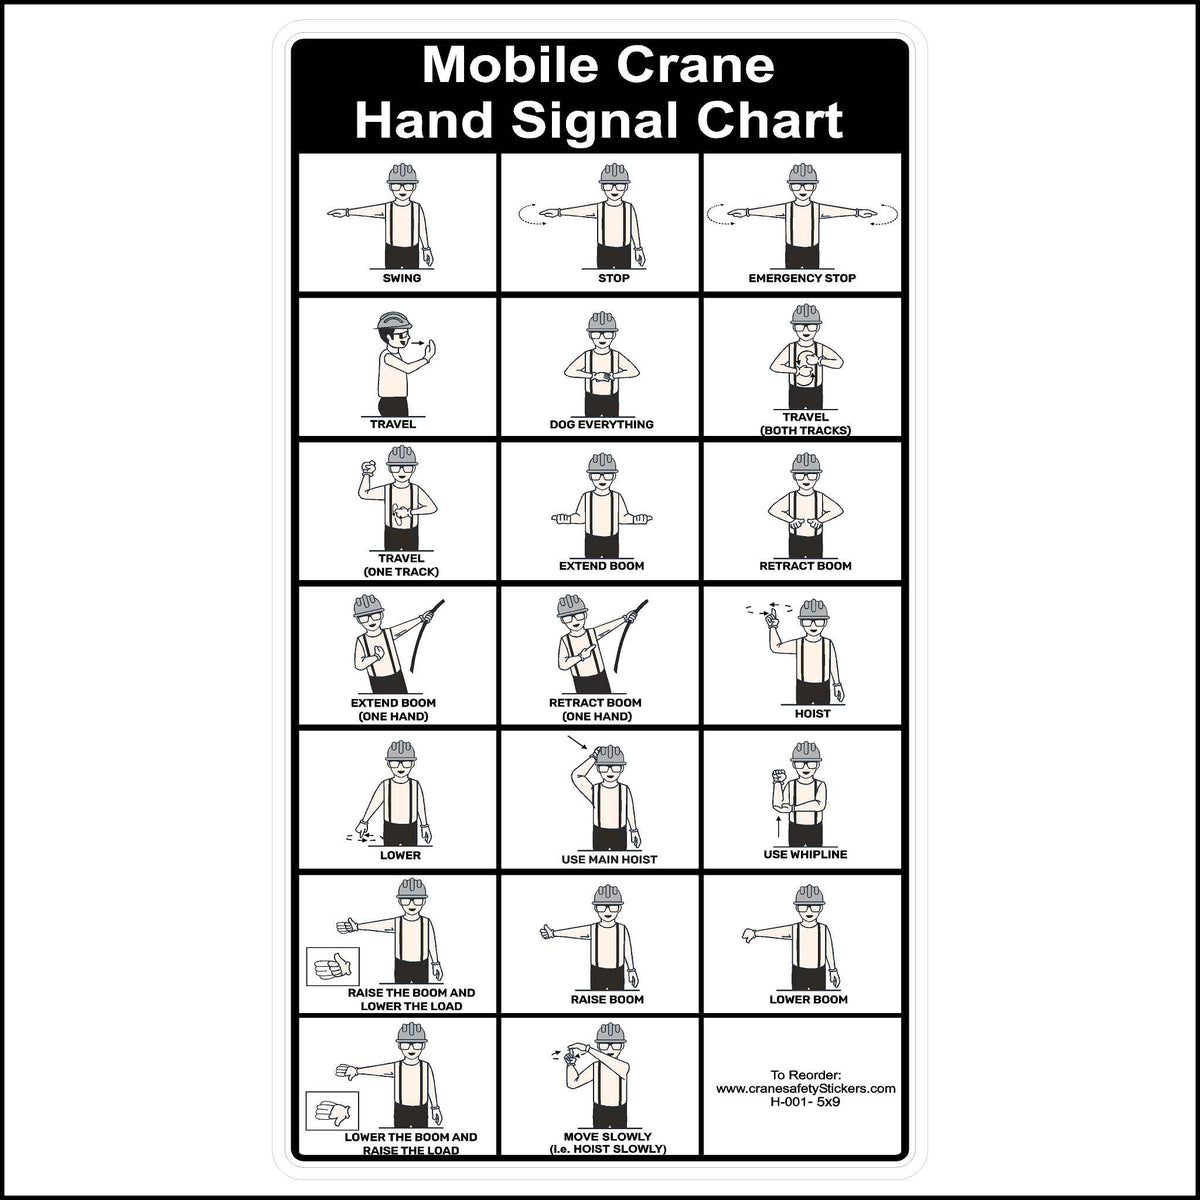 Mobile Crane Hand Signal Chart Printed with all the hand signals for a mobile crane. 5 inches by 9 inches in size.